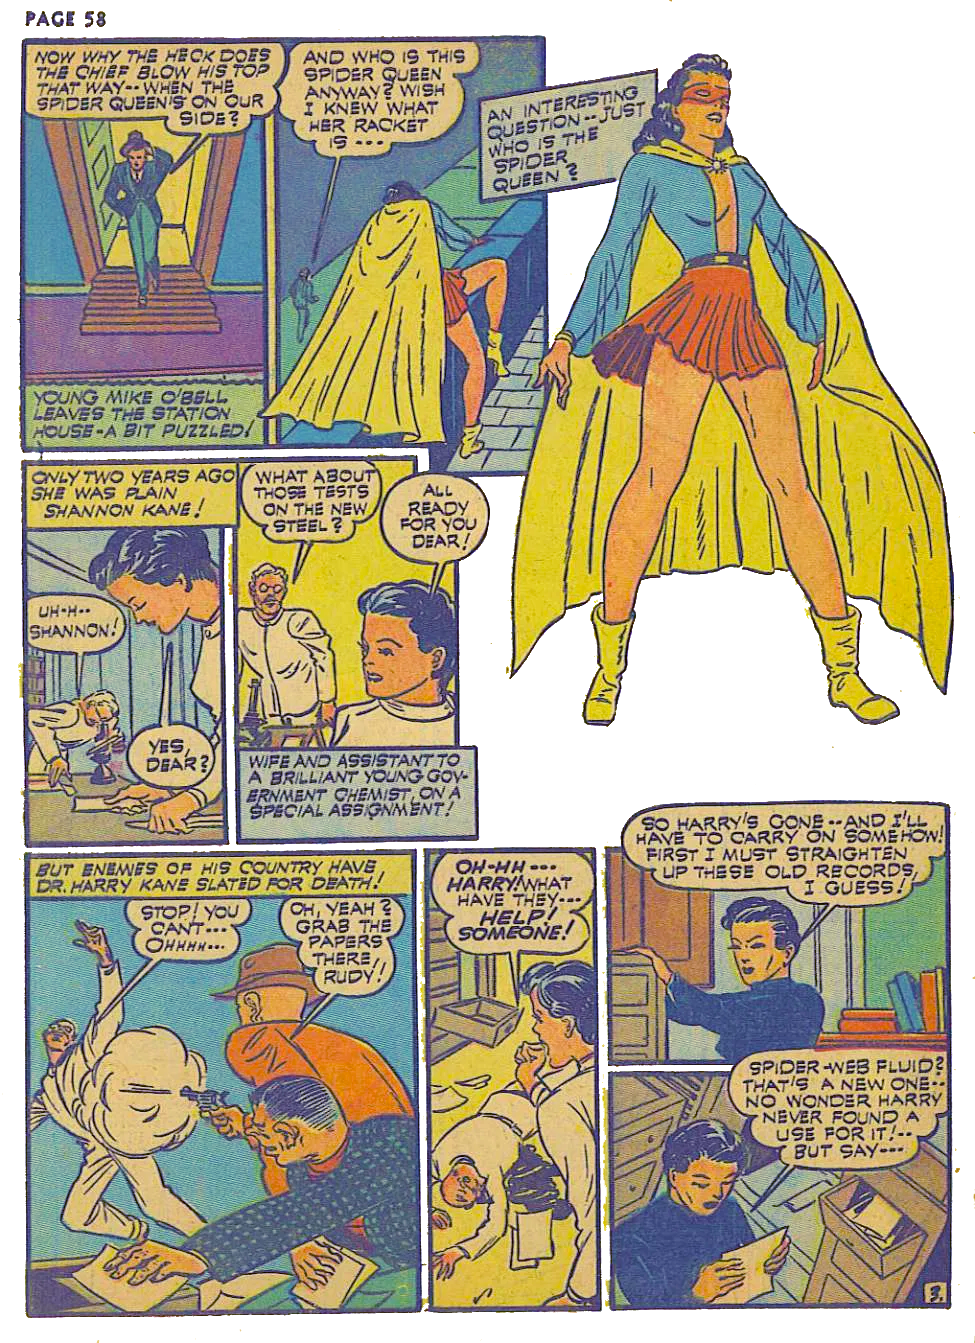 Spider Queen (1941) page 58